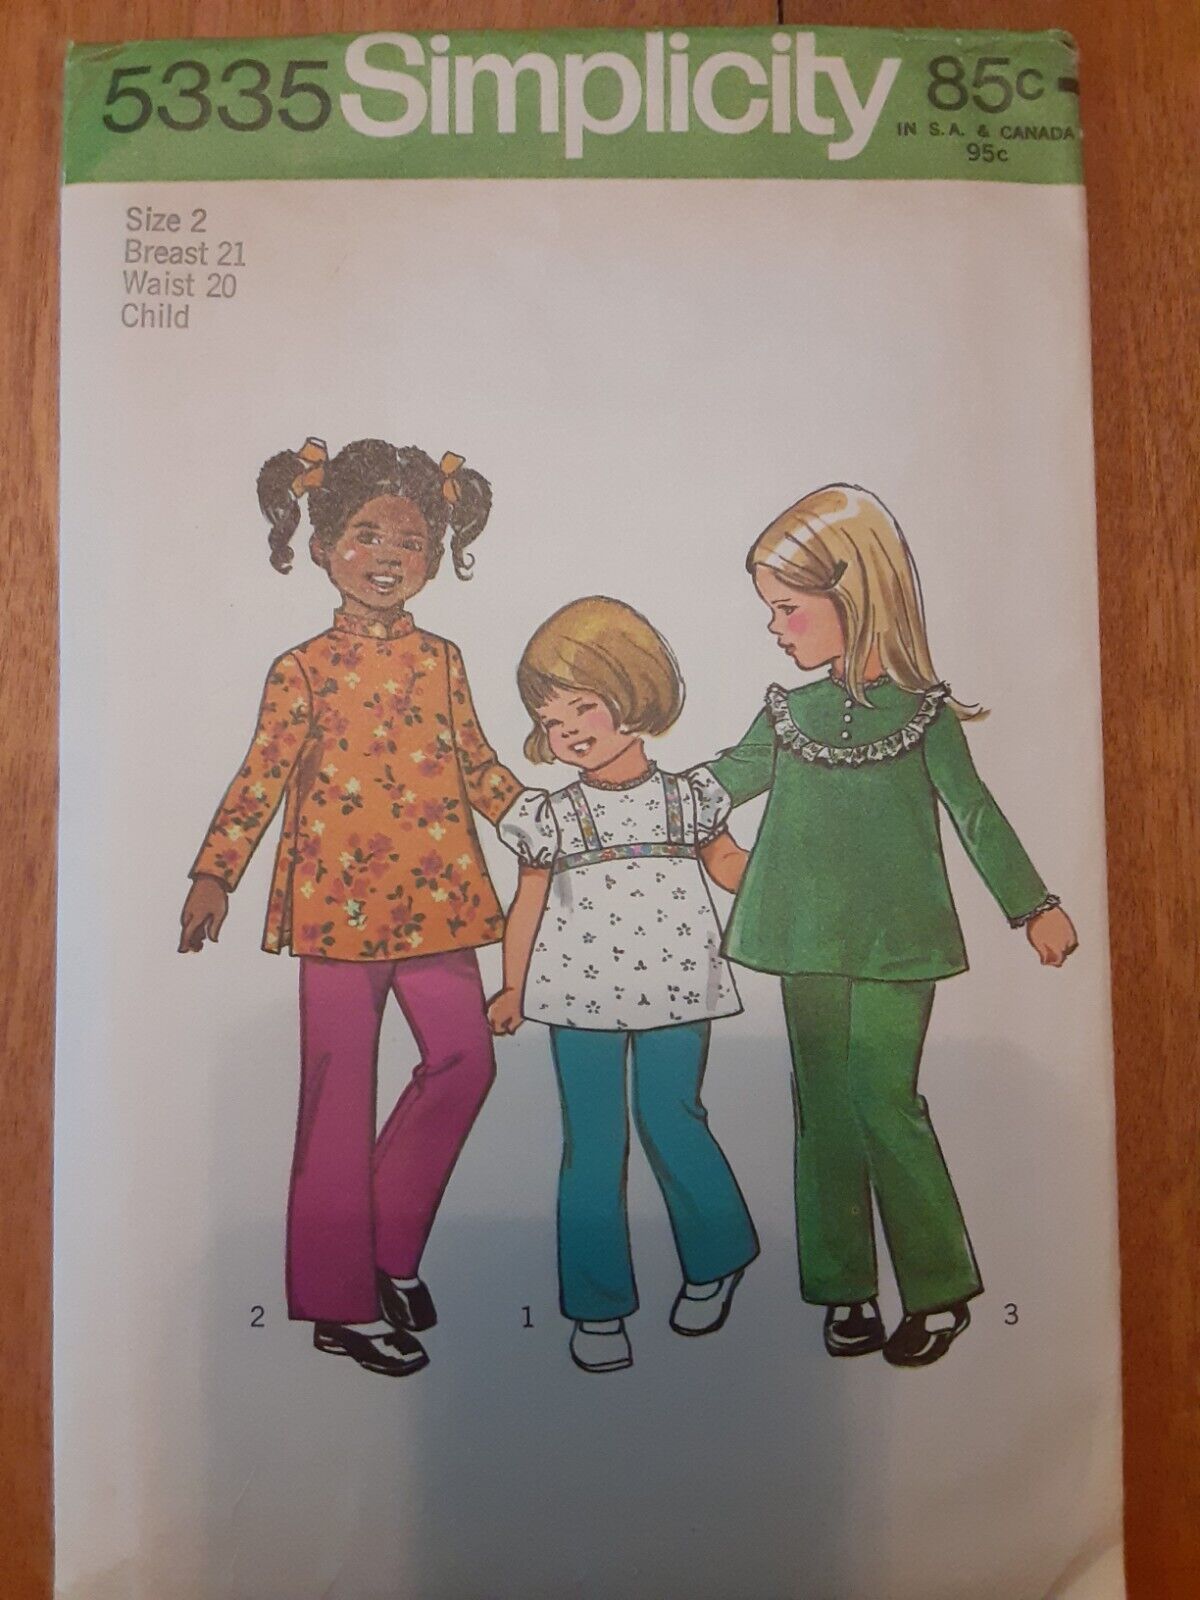 1972 Simplicity # 5335 Child Girl's Size 2 Breast 21